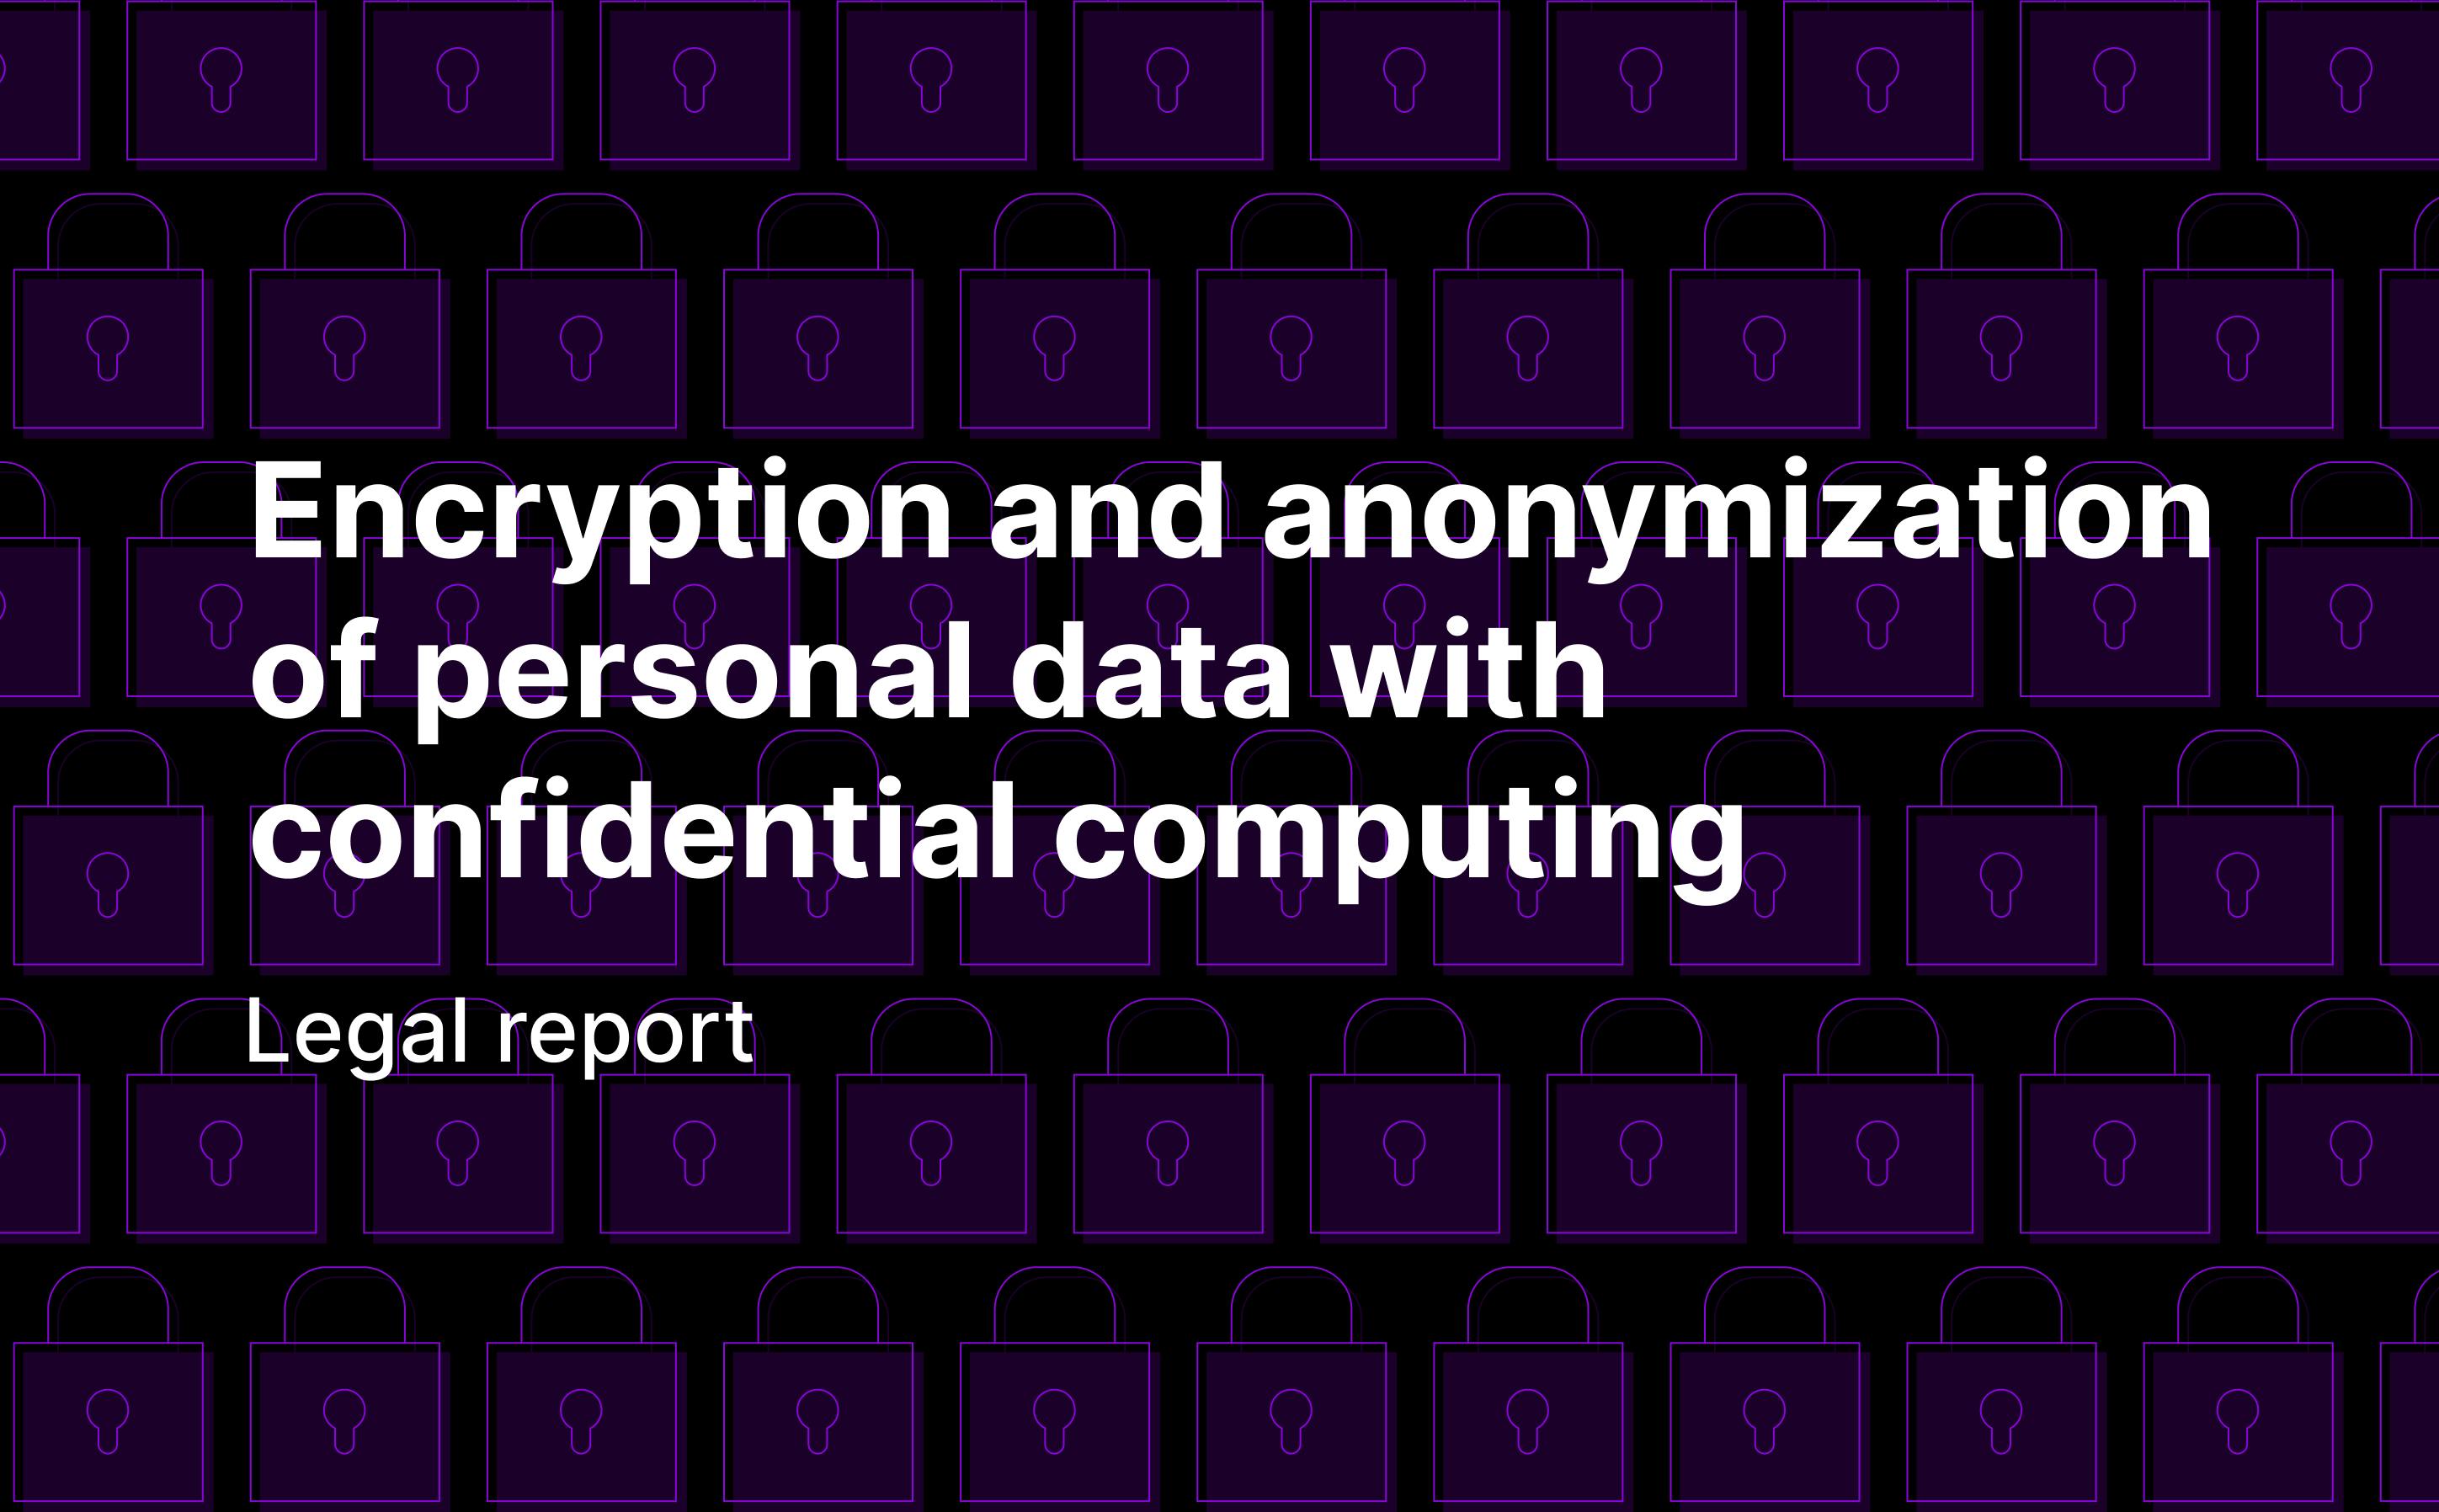 Legal report: Encryption and anonymization of personal data with confidential computing